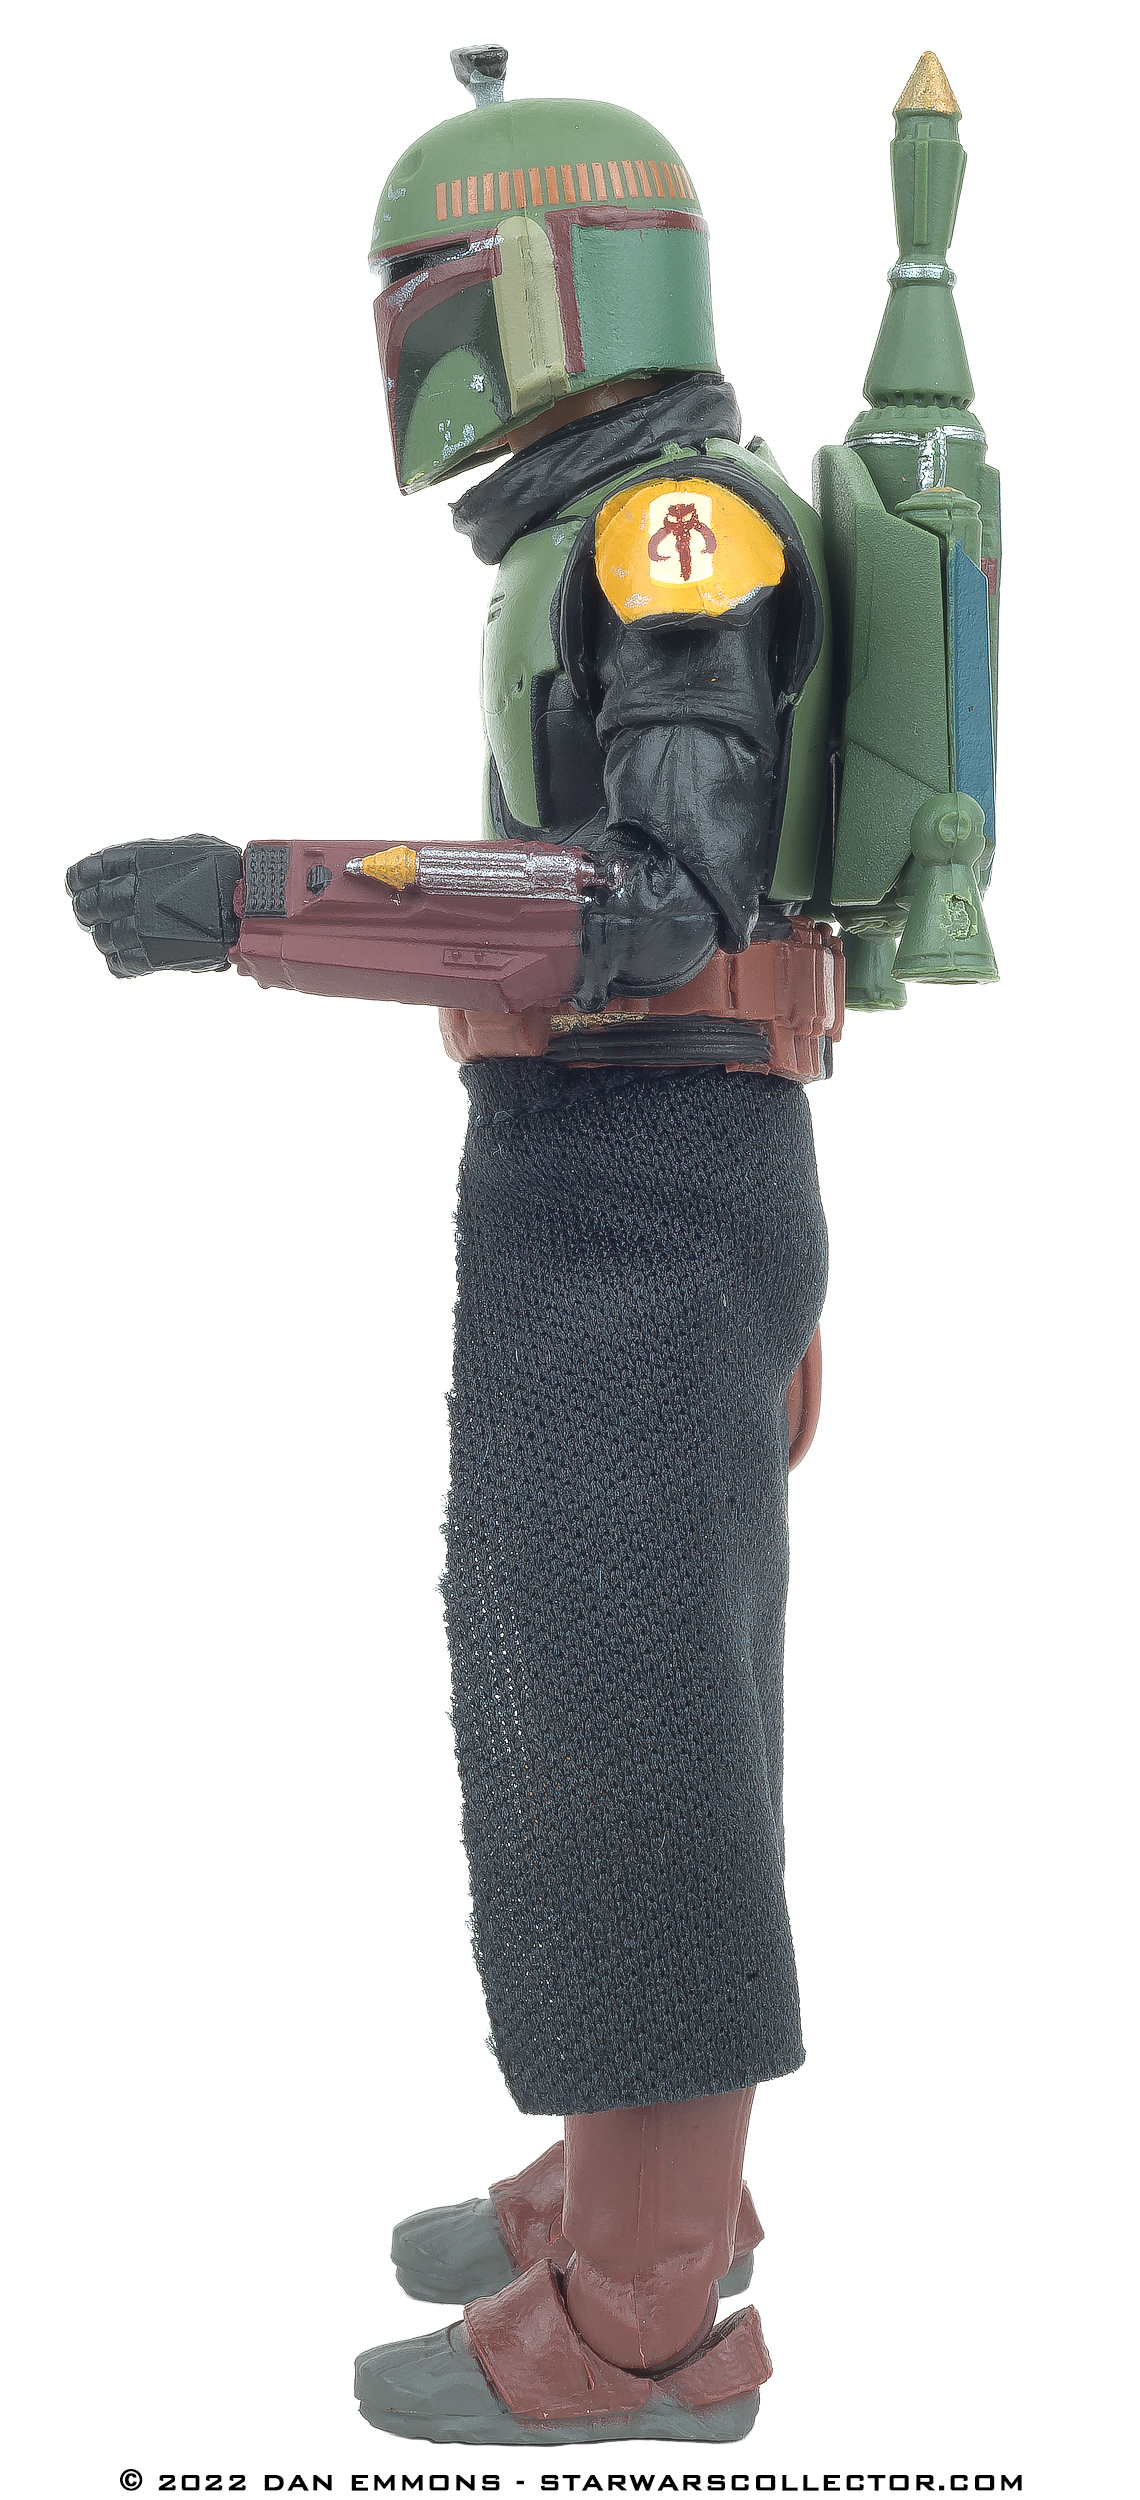 The Vintage Collection - Deluxe -  Boba Fett (Tatooine)